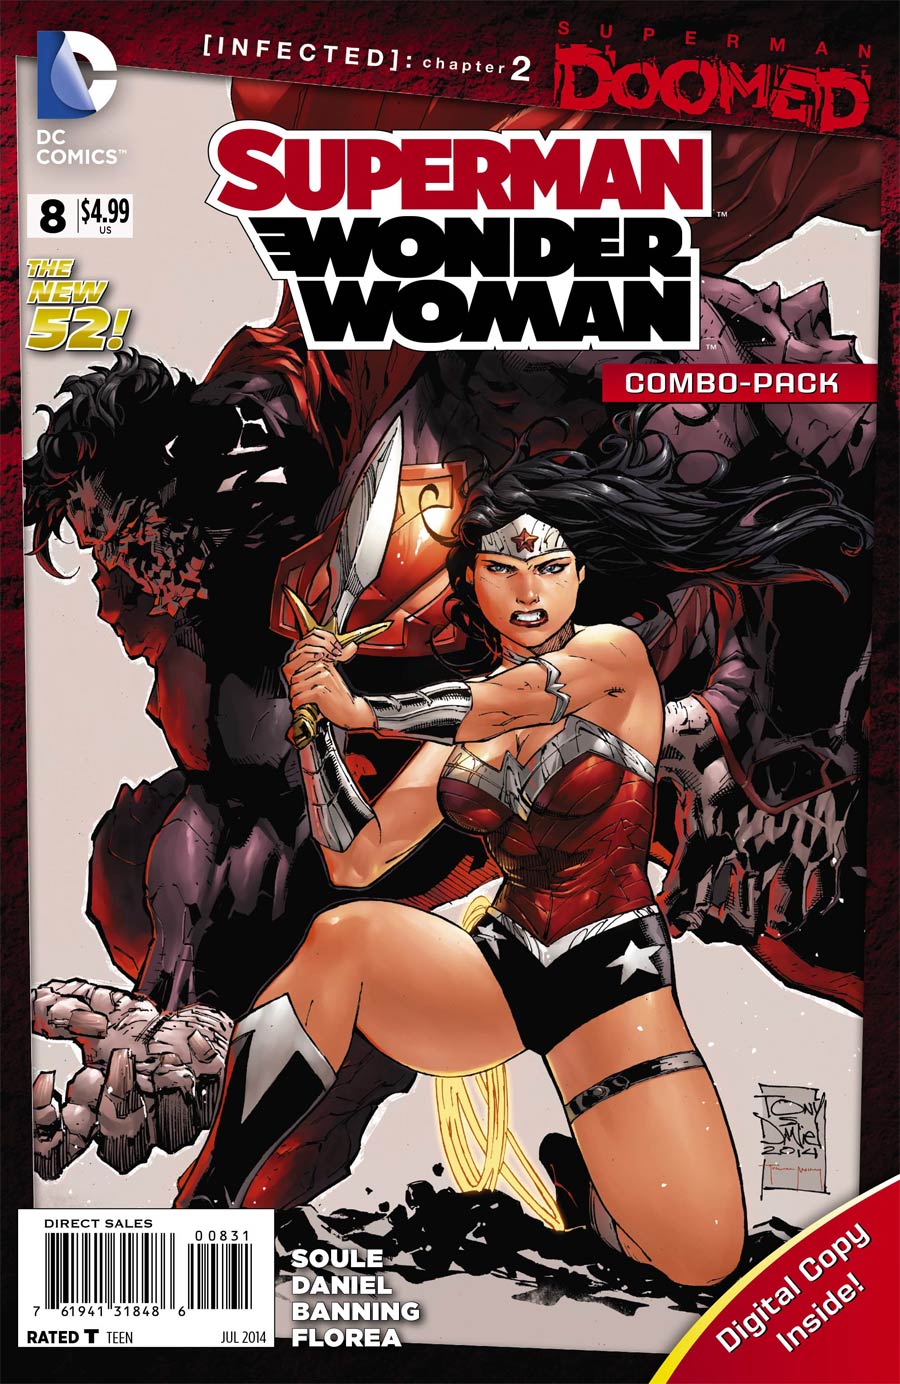 Superman Wonder Woman #8 Cover C Combo Pack Without Polybag (Superman Doomed Tie-In)